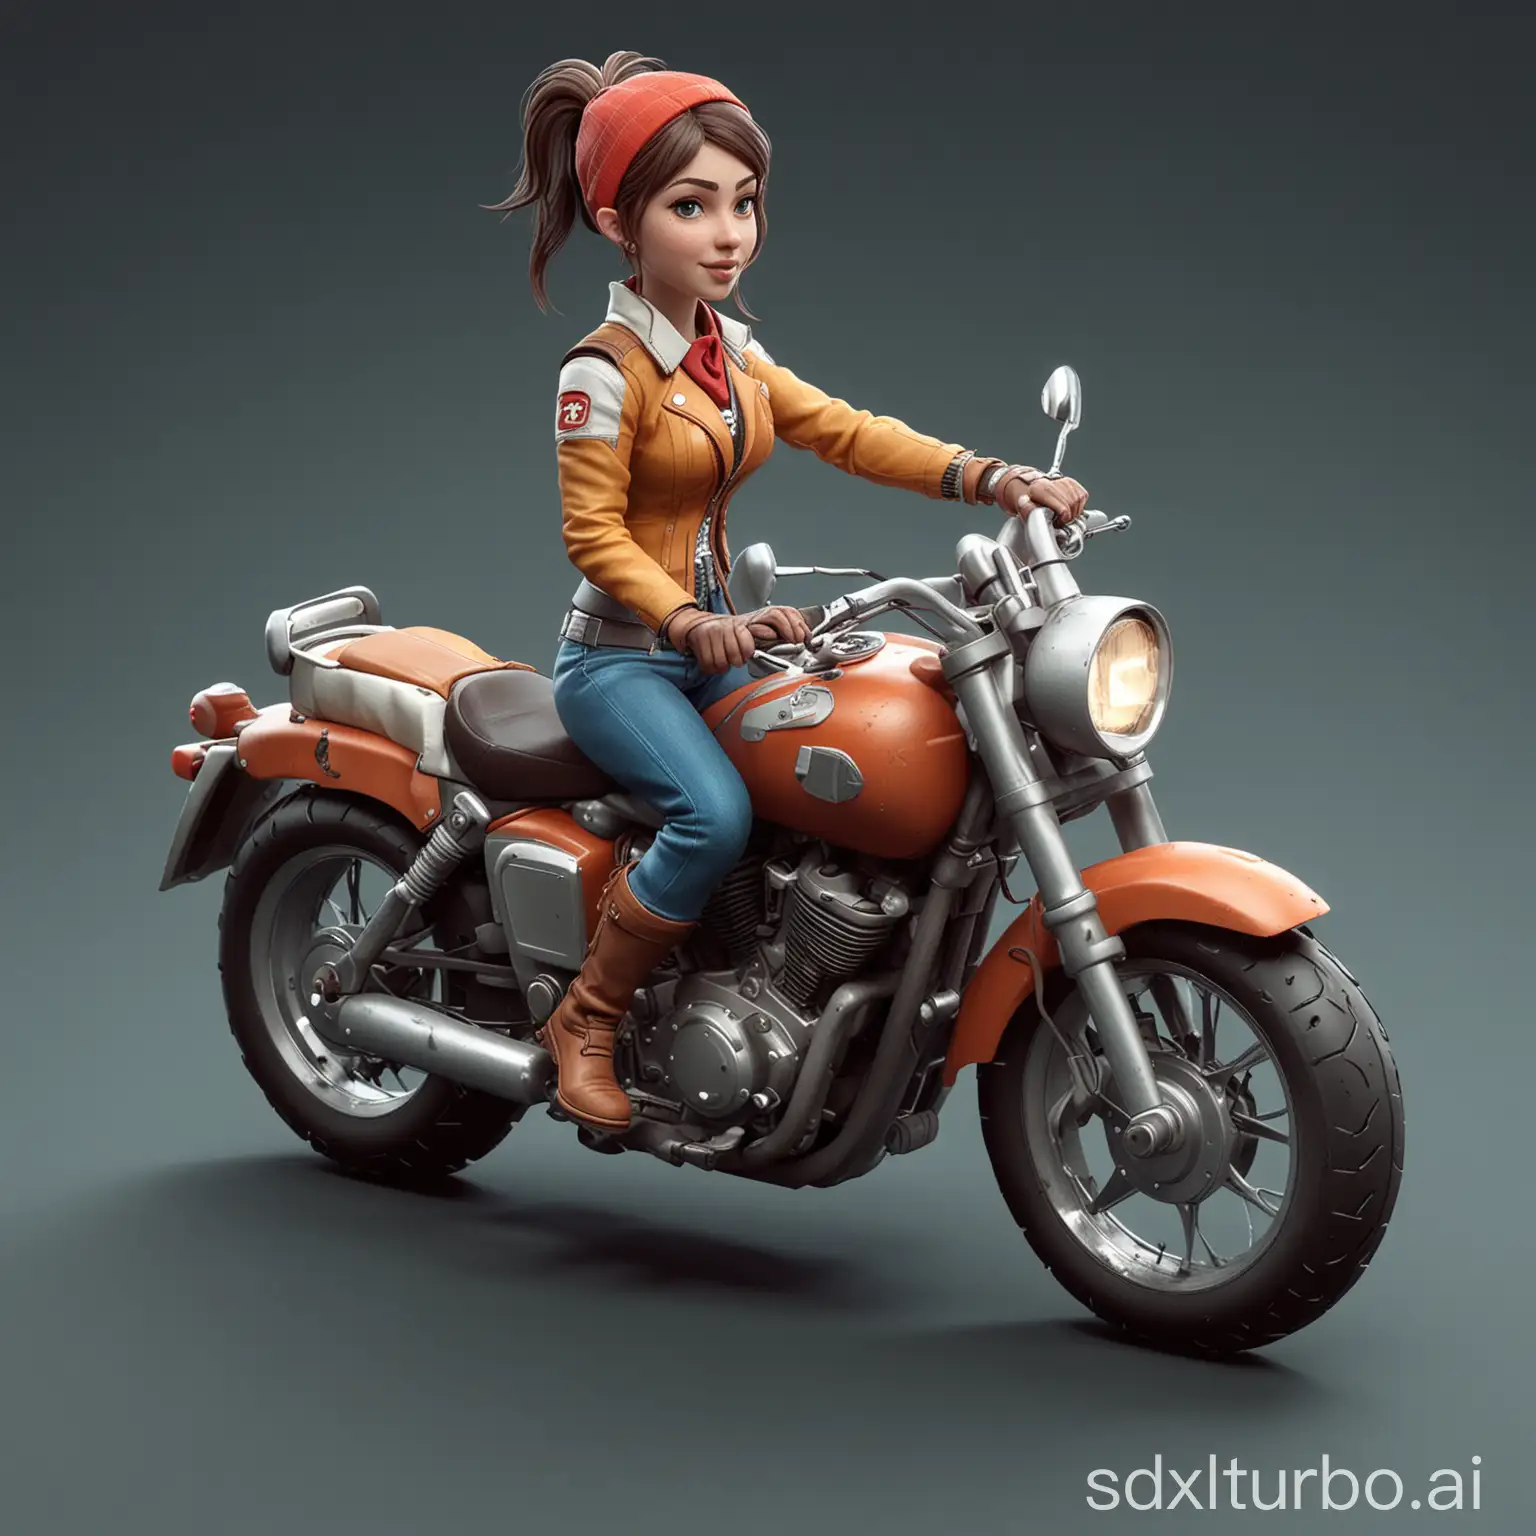 Isometric-3D-Character-Riding-a-Motorcycle